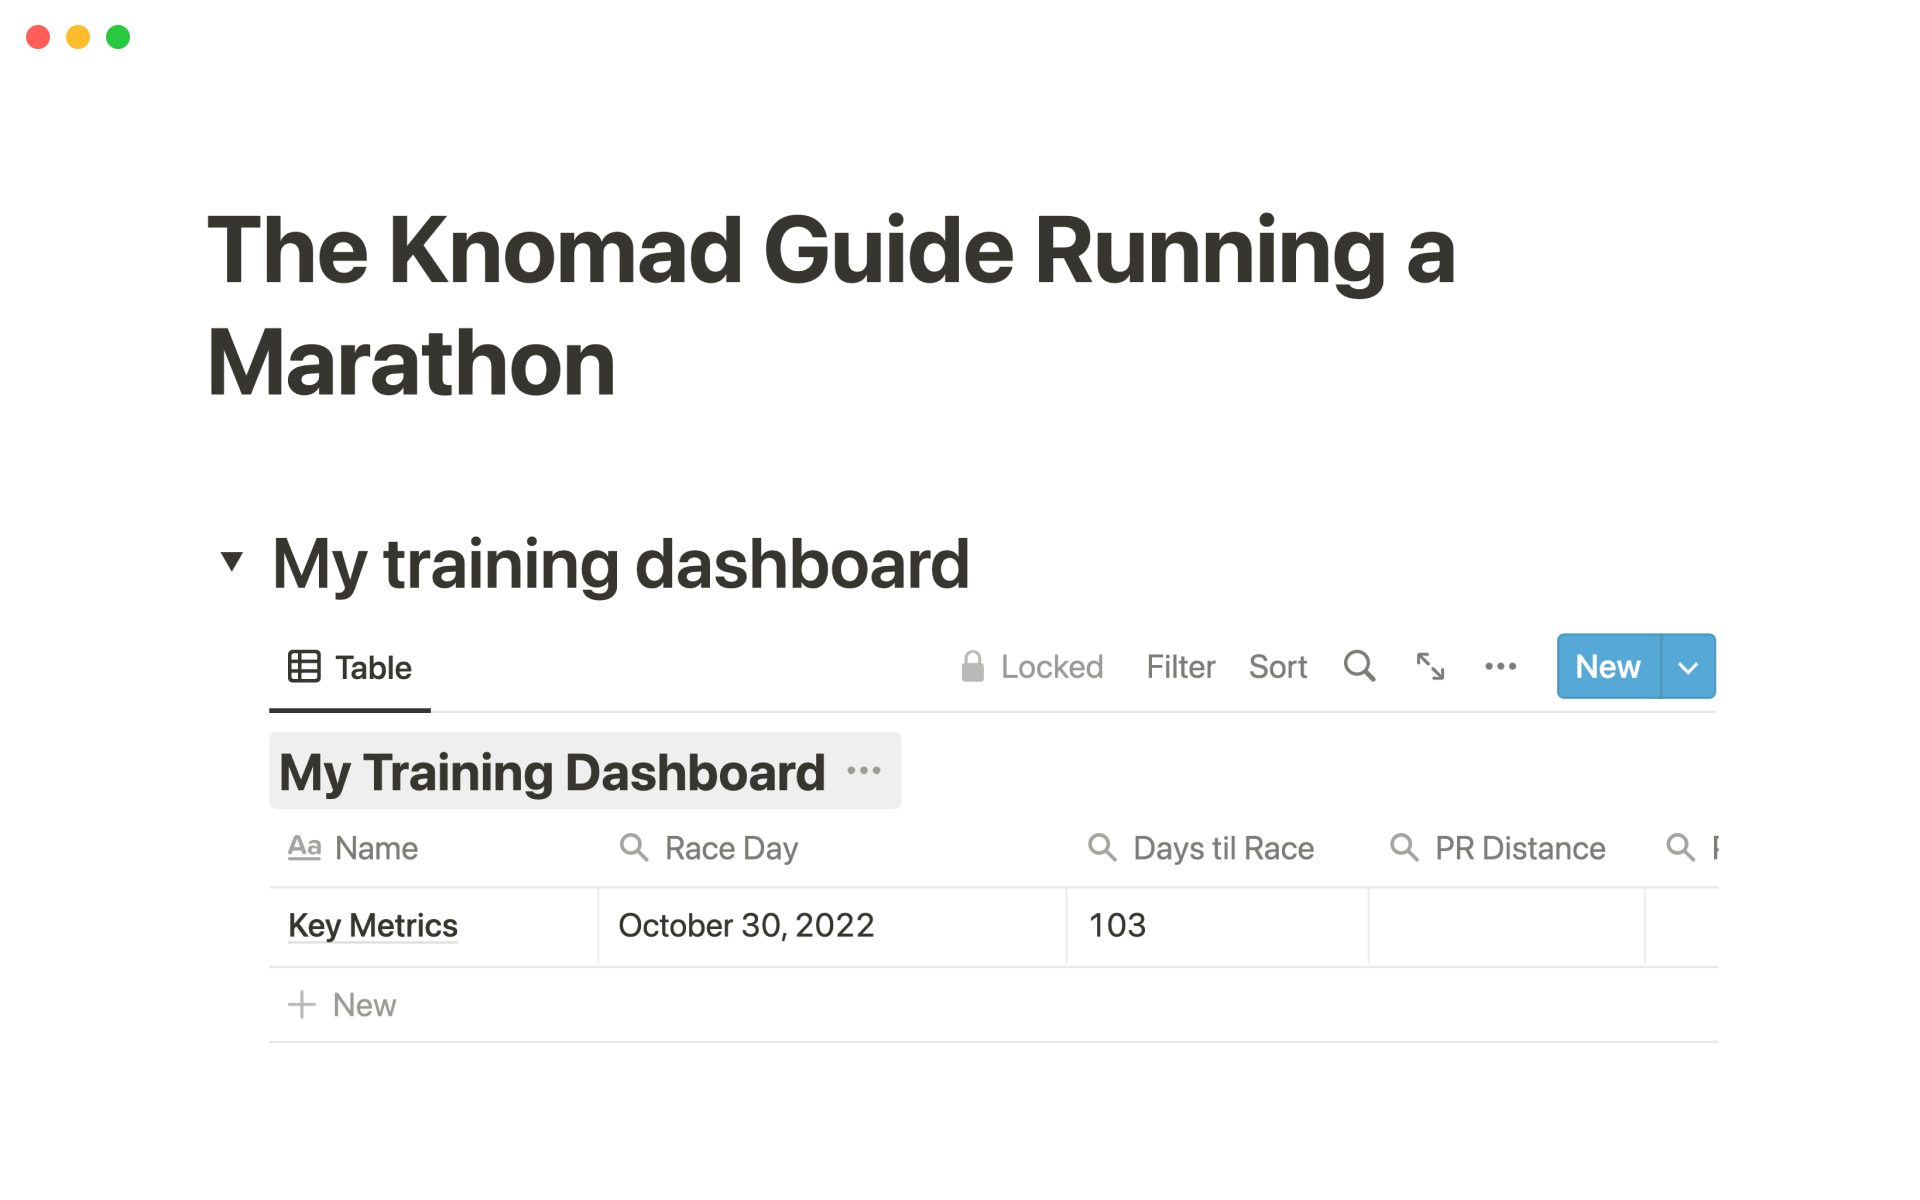 A comprehensive template that includes everything you need to plan, train, and run a marathon.